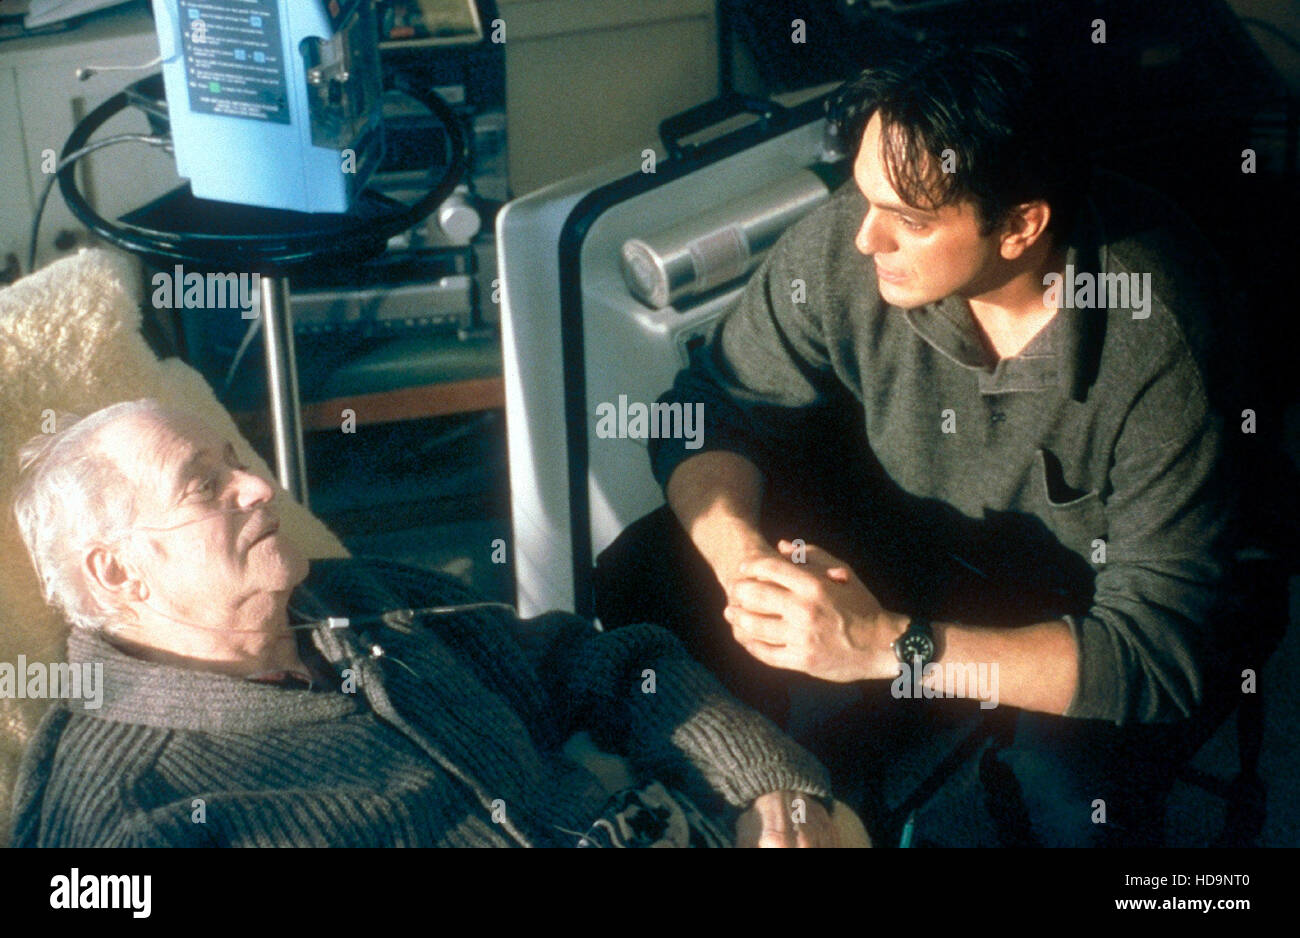 Tuesdays with Morrie (TV 1999) 